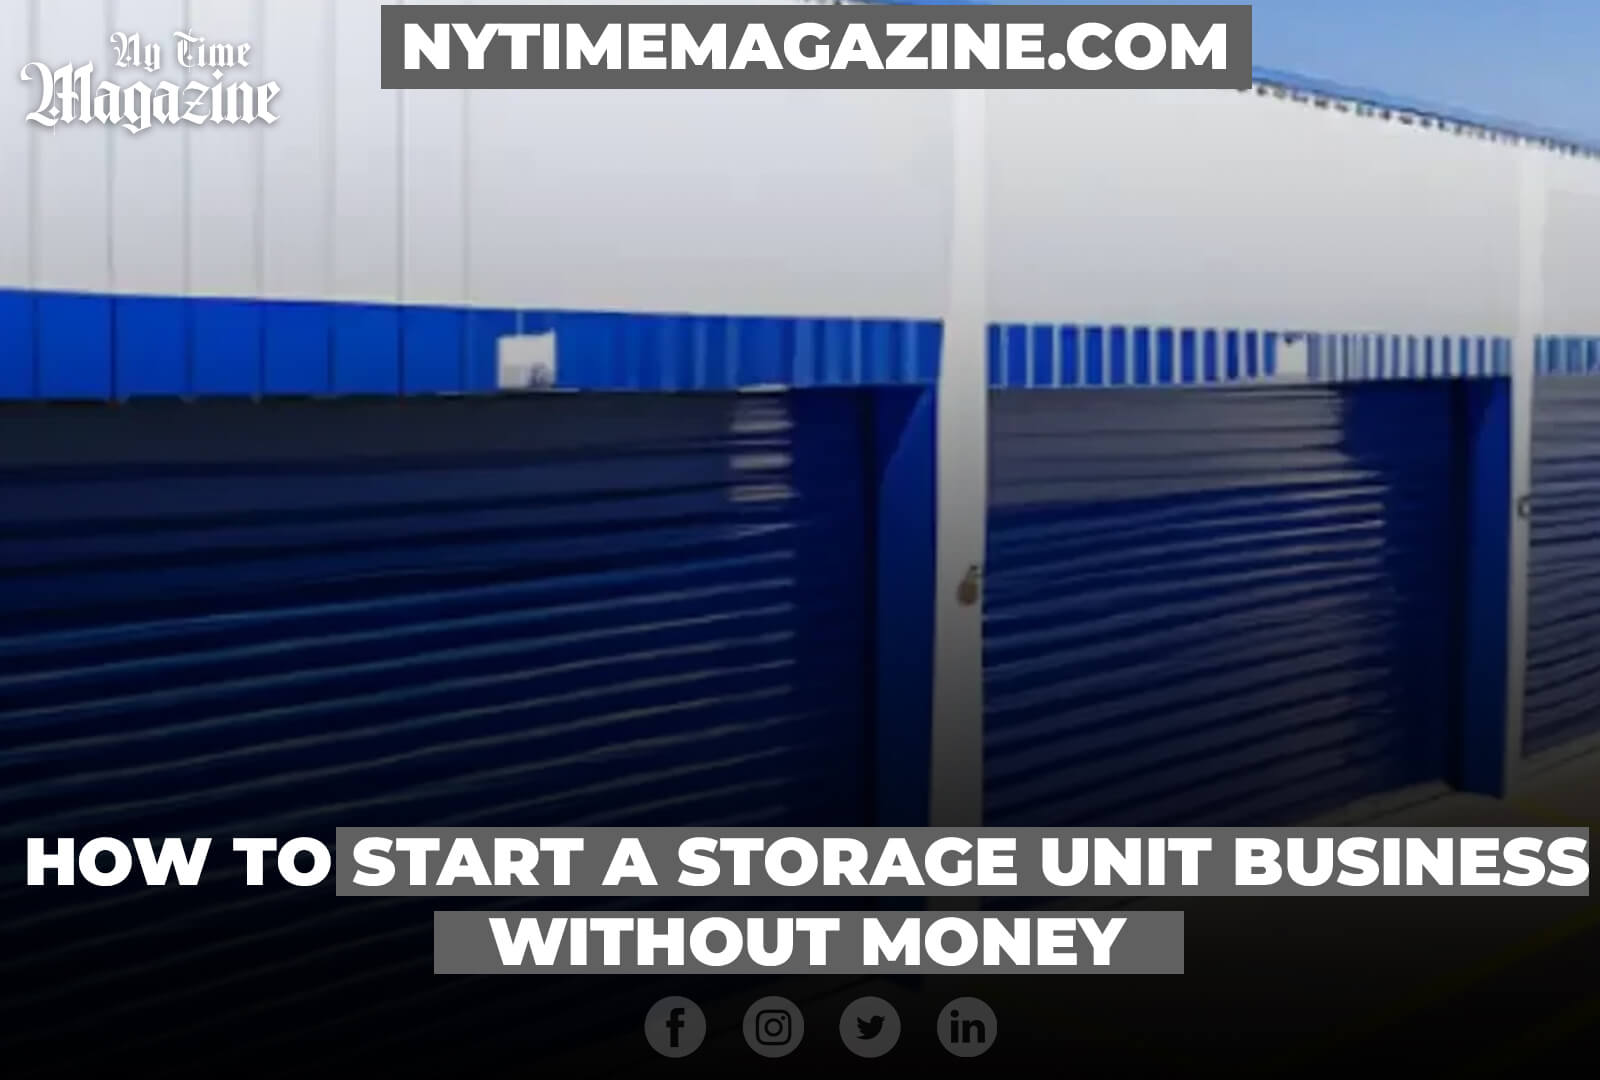 How to Start a Storage Unit Business Without Money